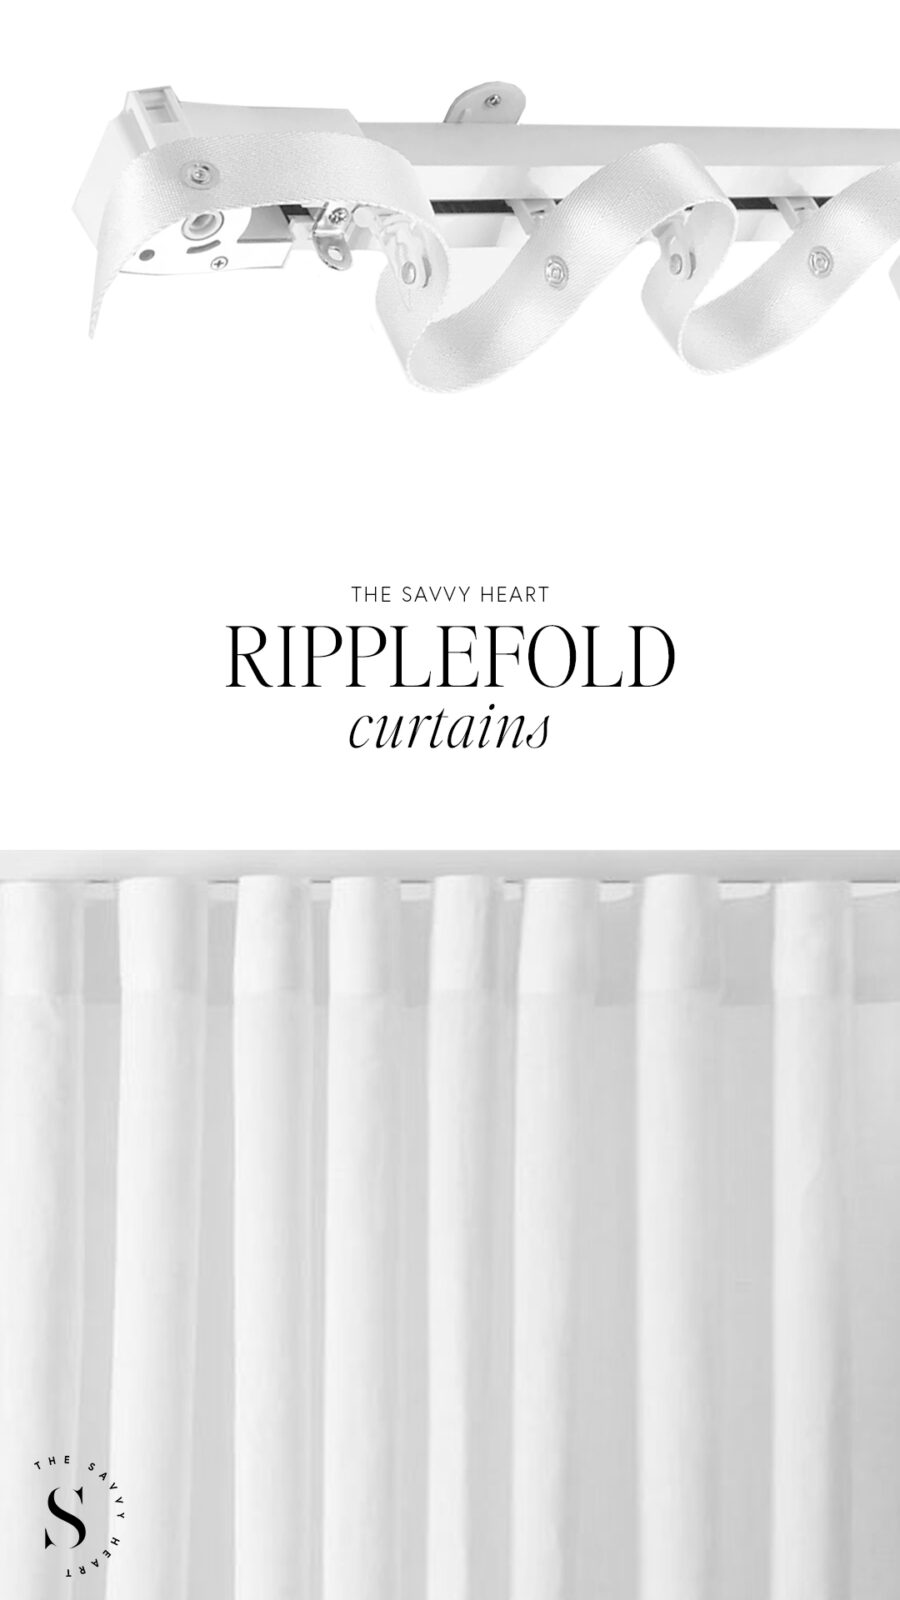 Different Drapery & Curtain Styles: What Types To Buy And Which Ones To Avoid - Ripplefold, Wave fold and S Fold curtains